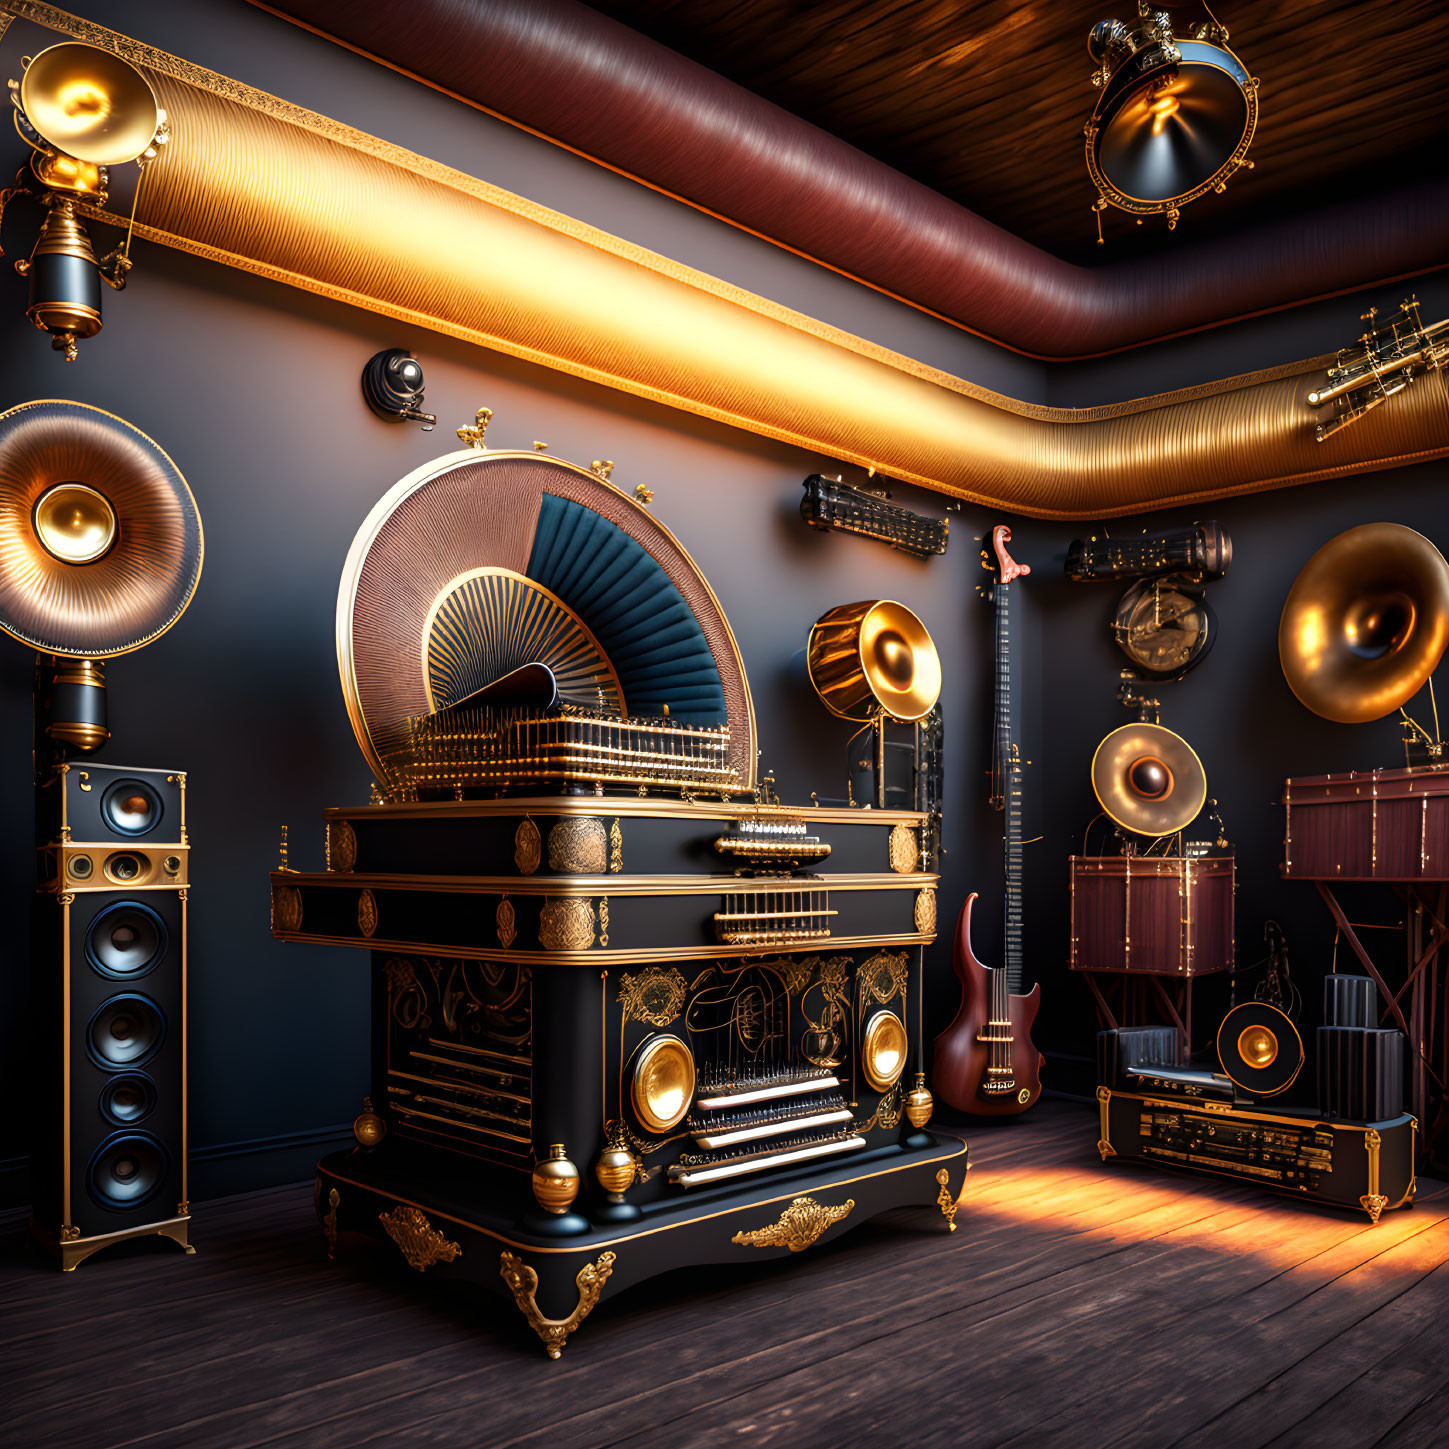 Vintage Music Room with Gramophone, Guitars, and Gold Accents